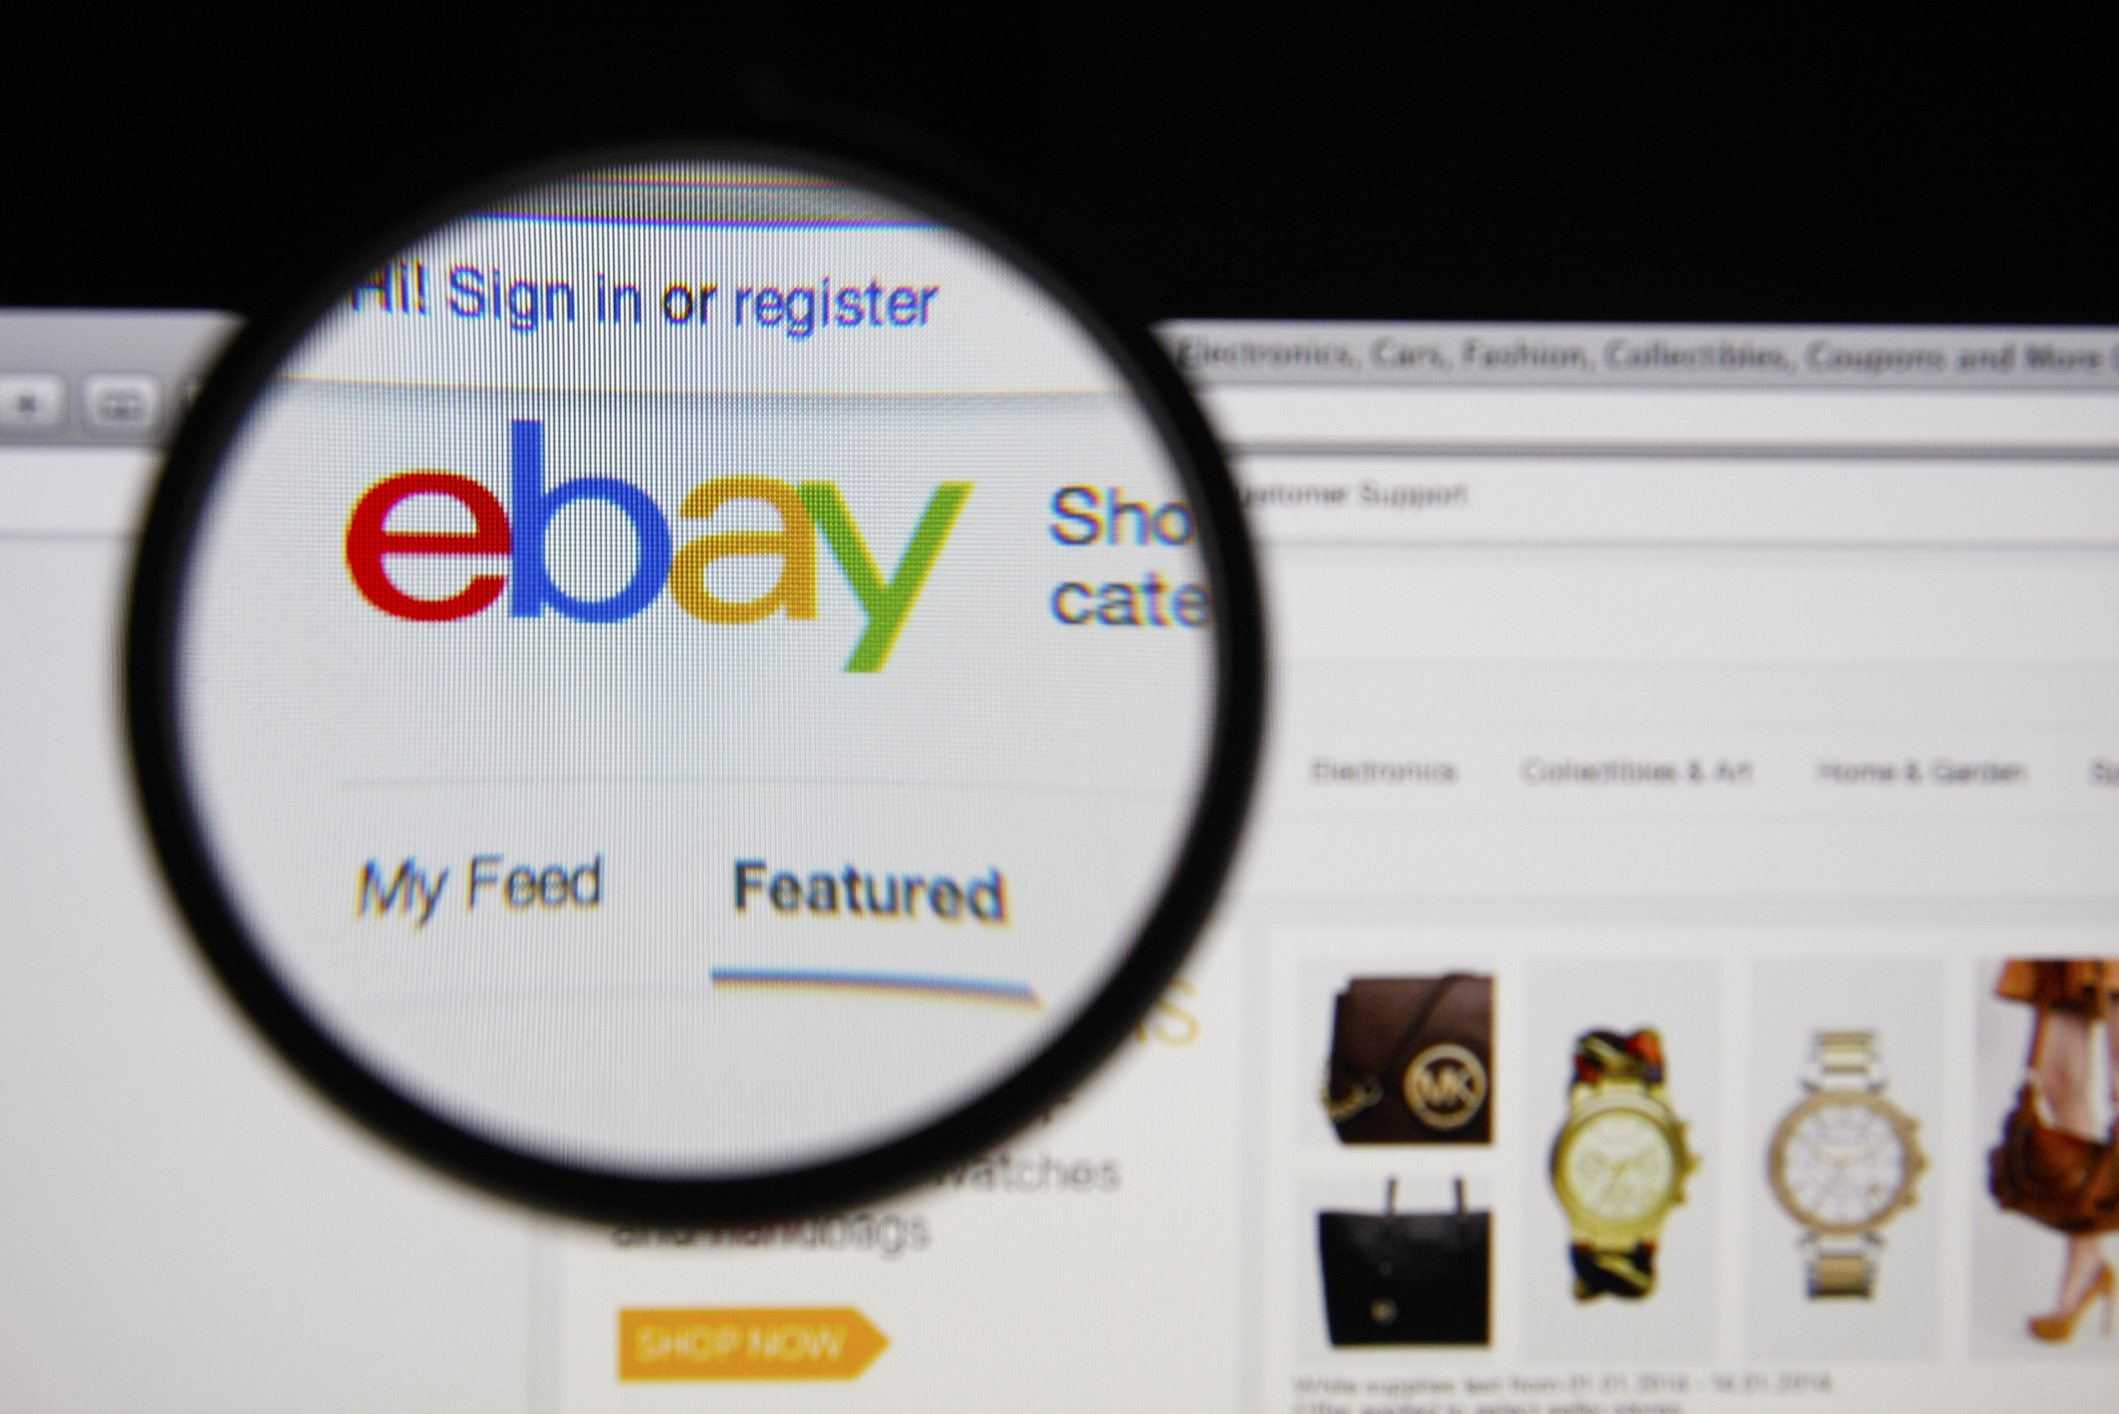 10 great Cyber Monday deals at eBay